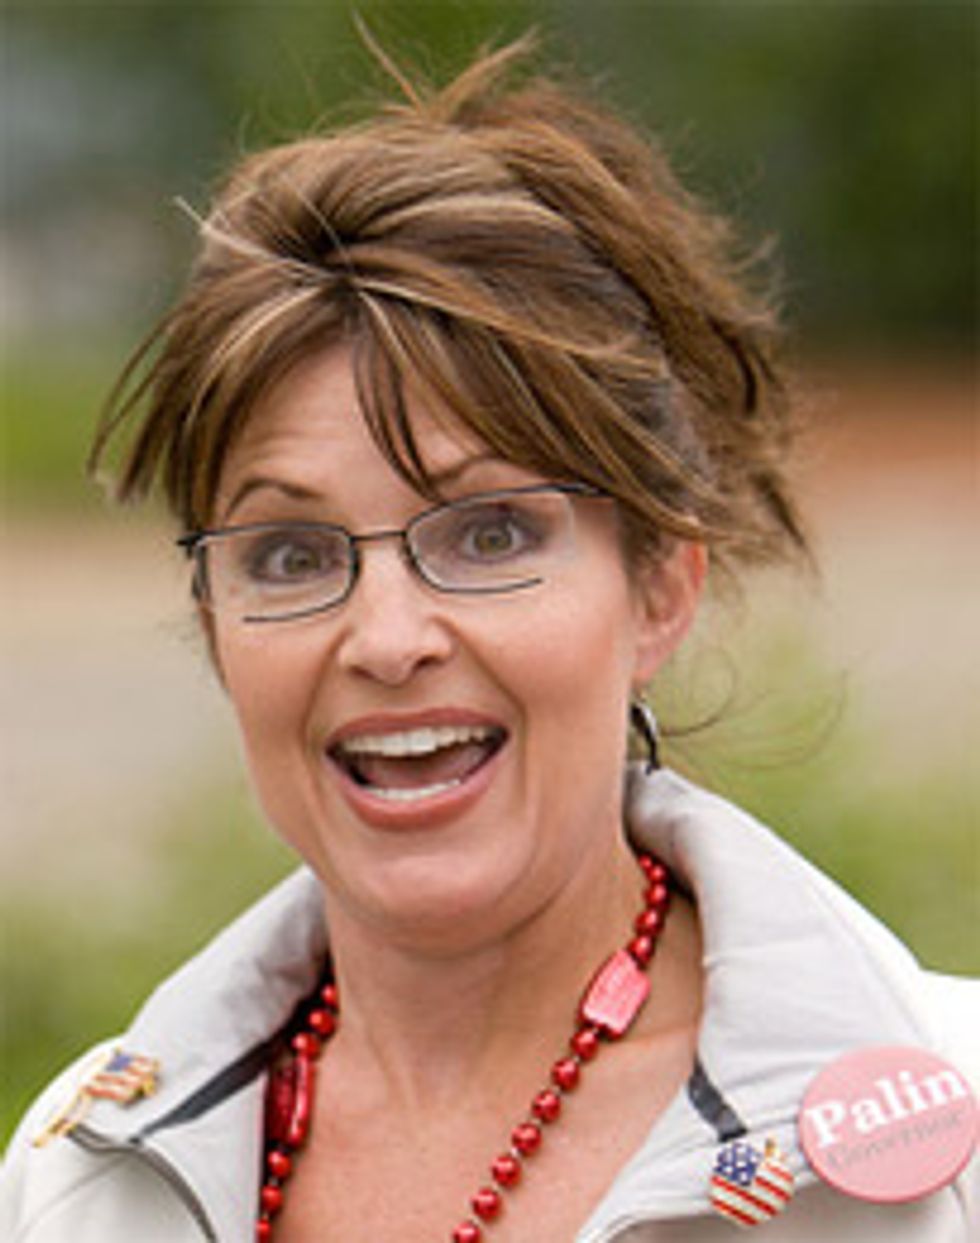 RNC To Replace Michael Steele With Even More Hilarious Sarah Palin?